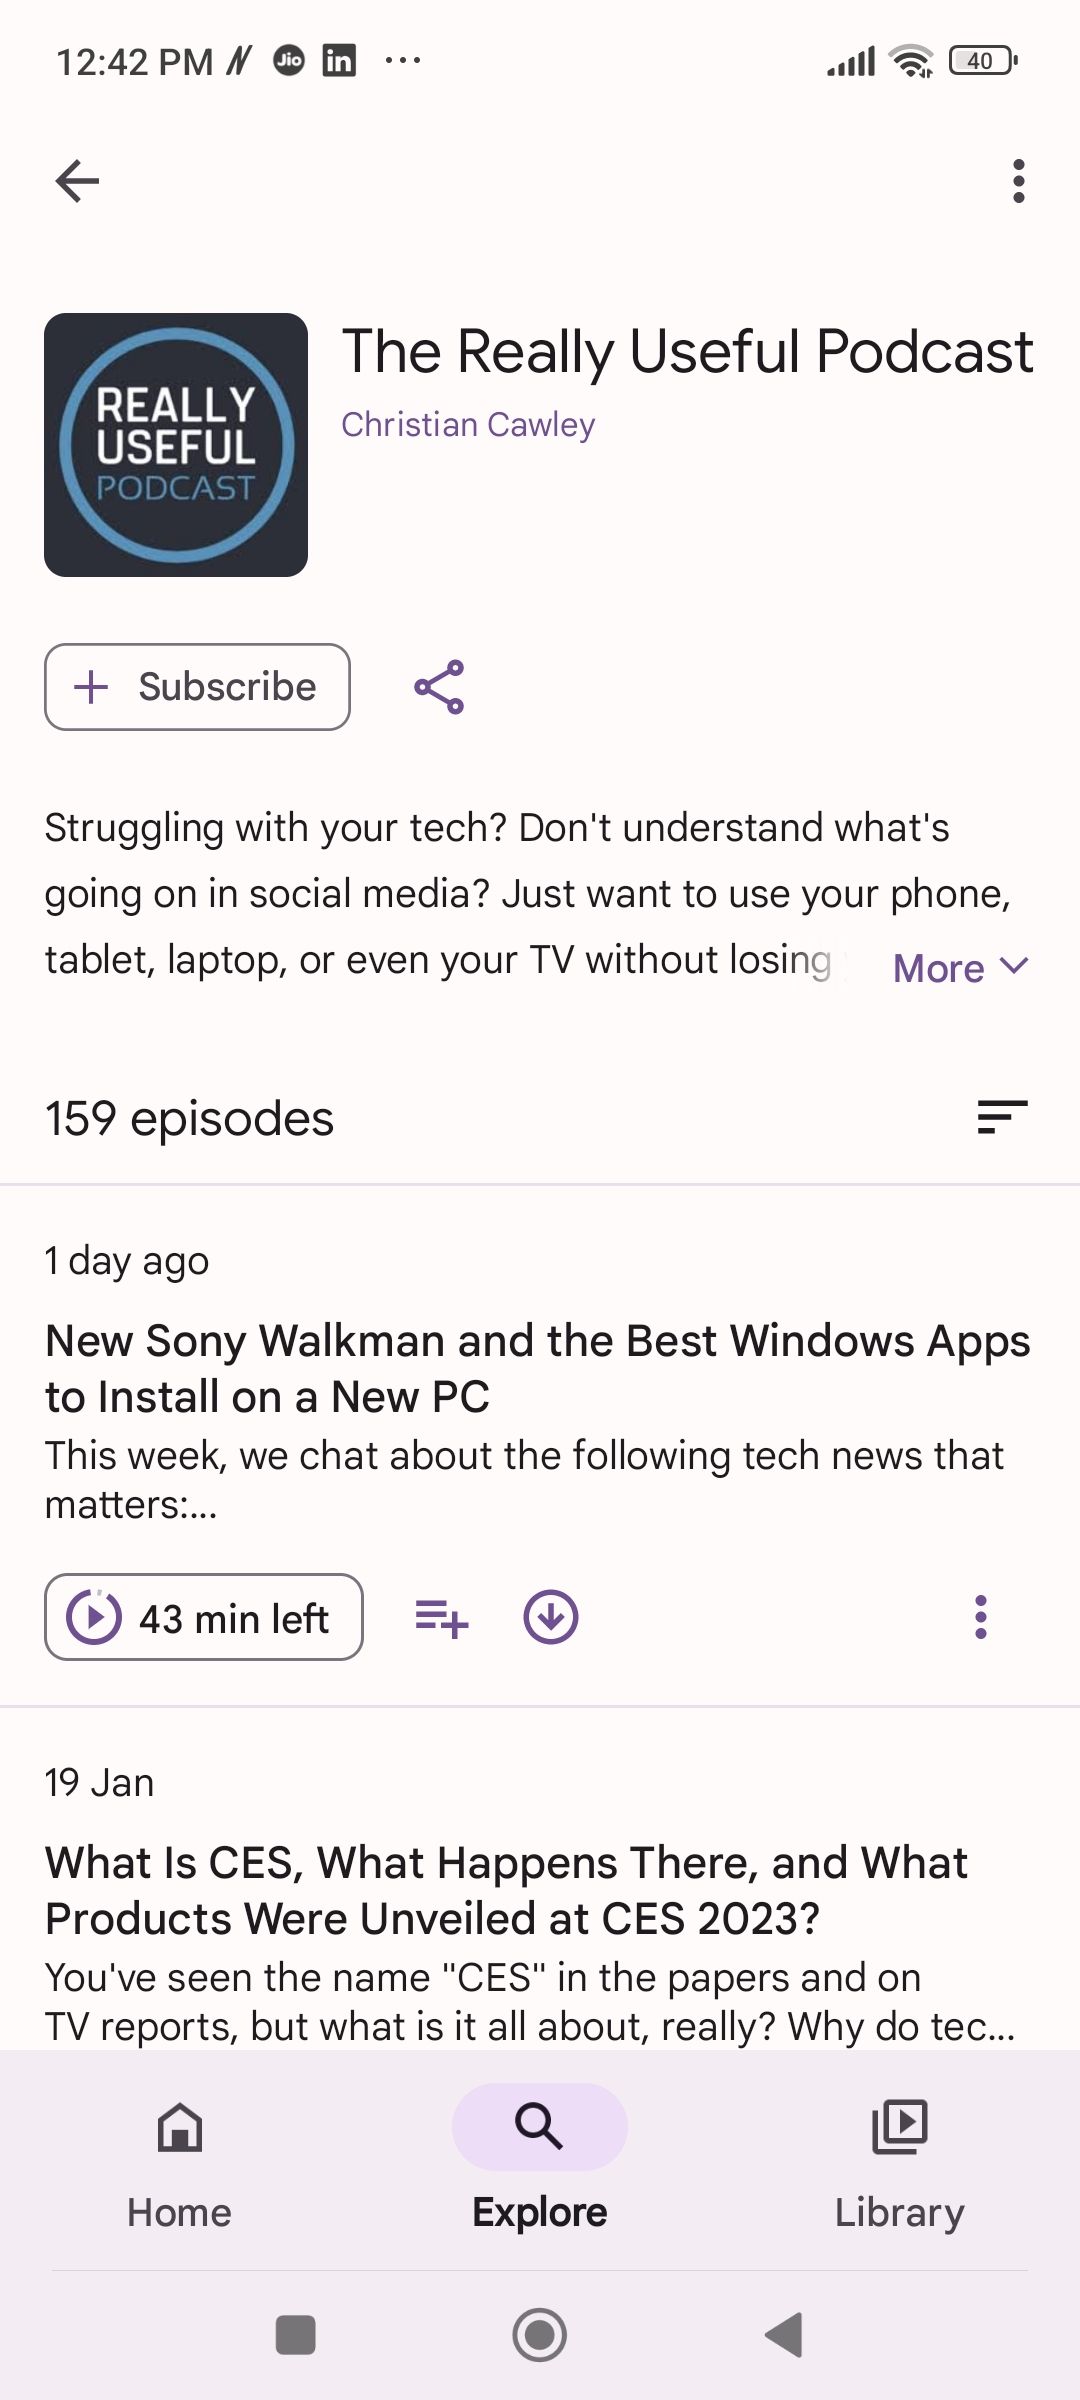 Google Podcasts podcast overview and episodes